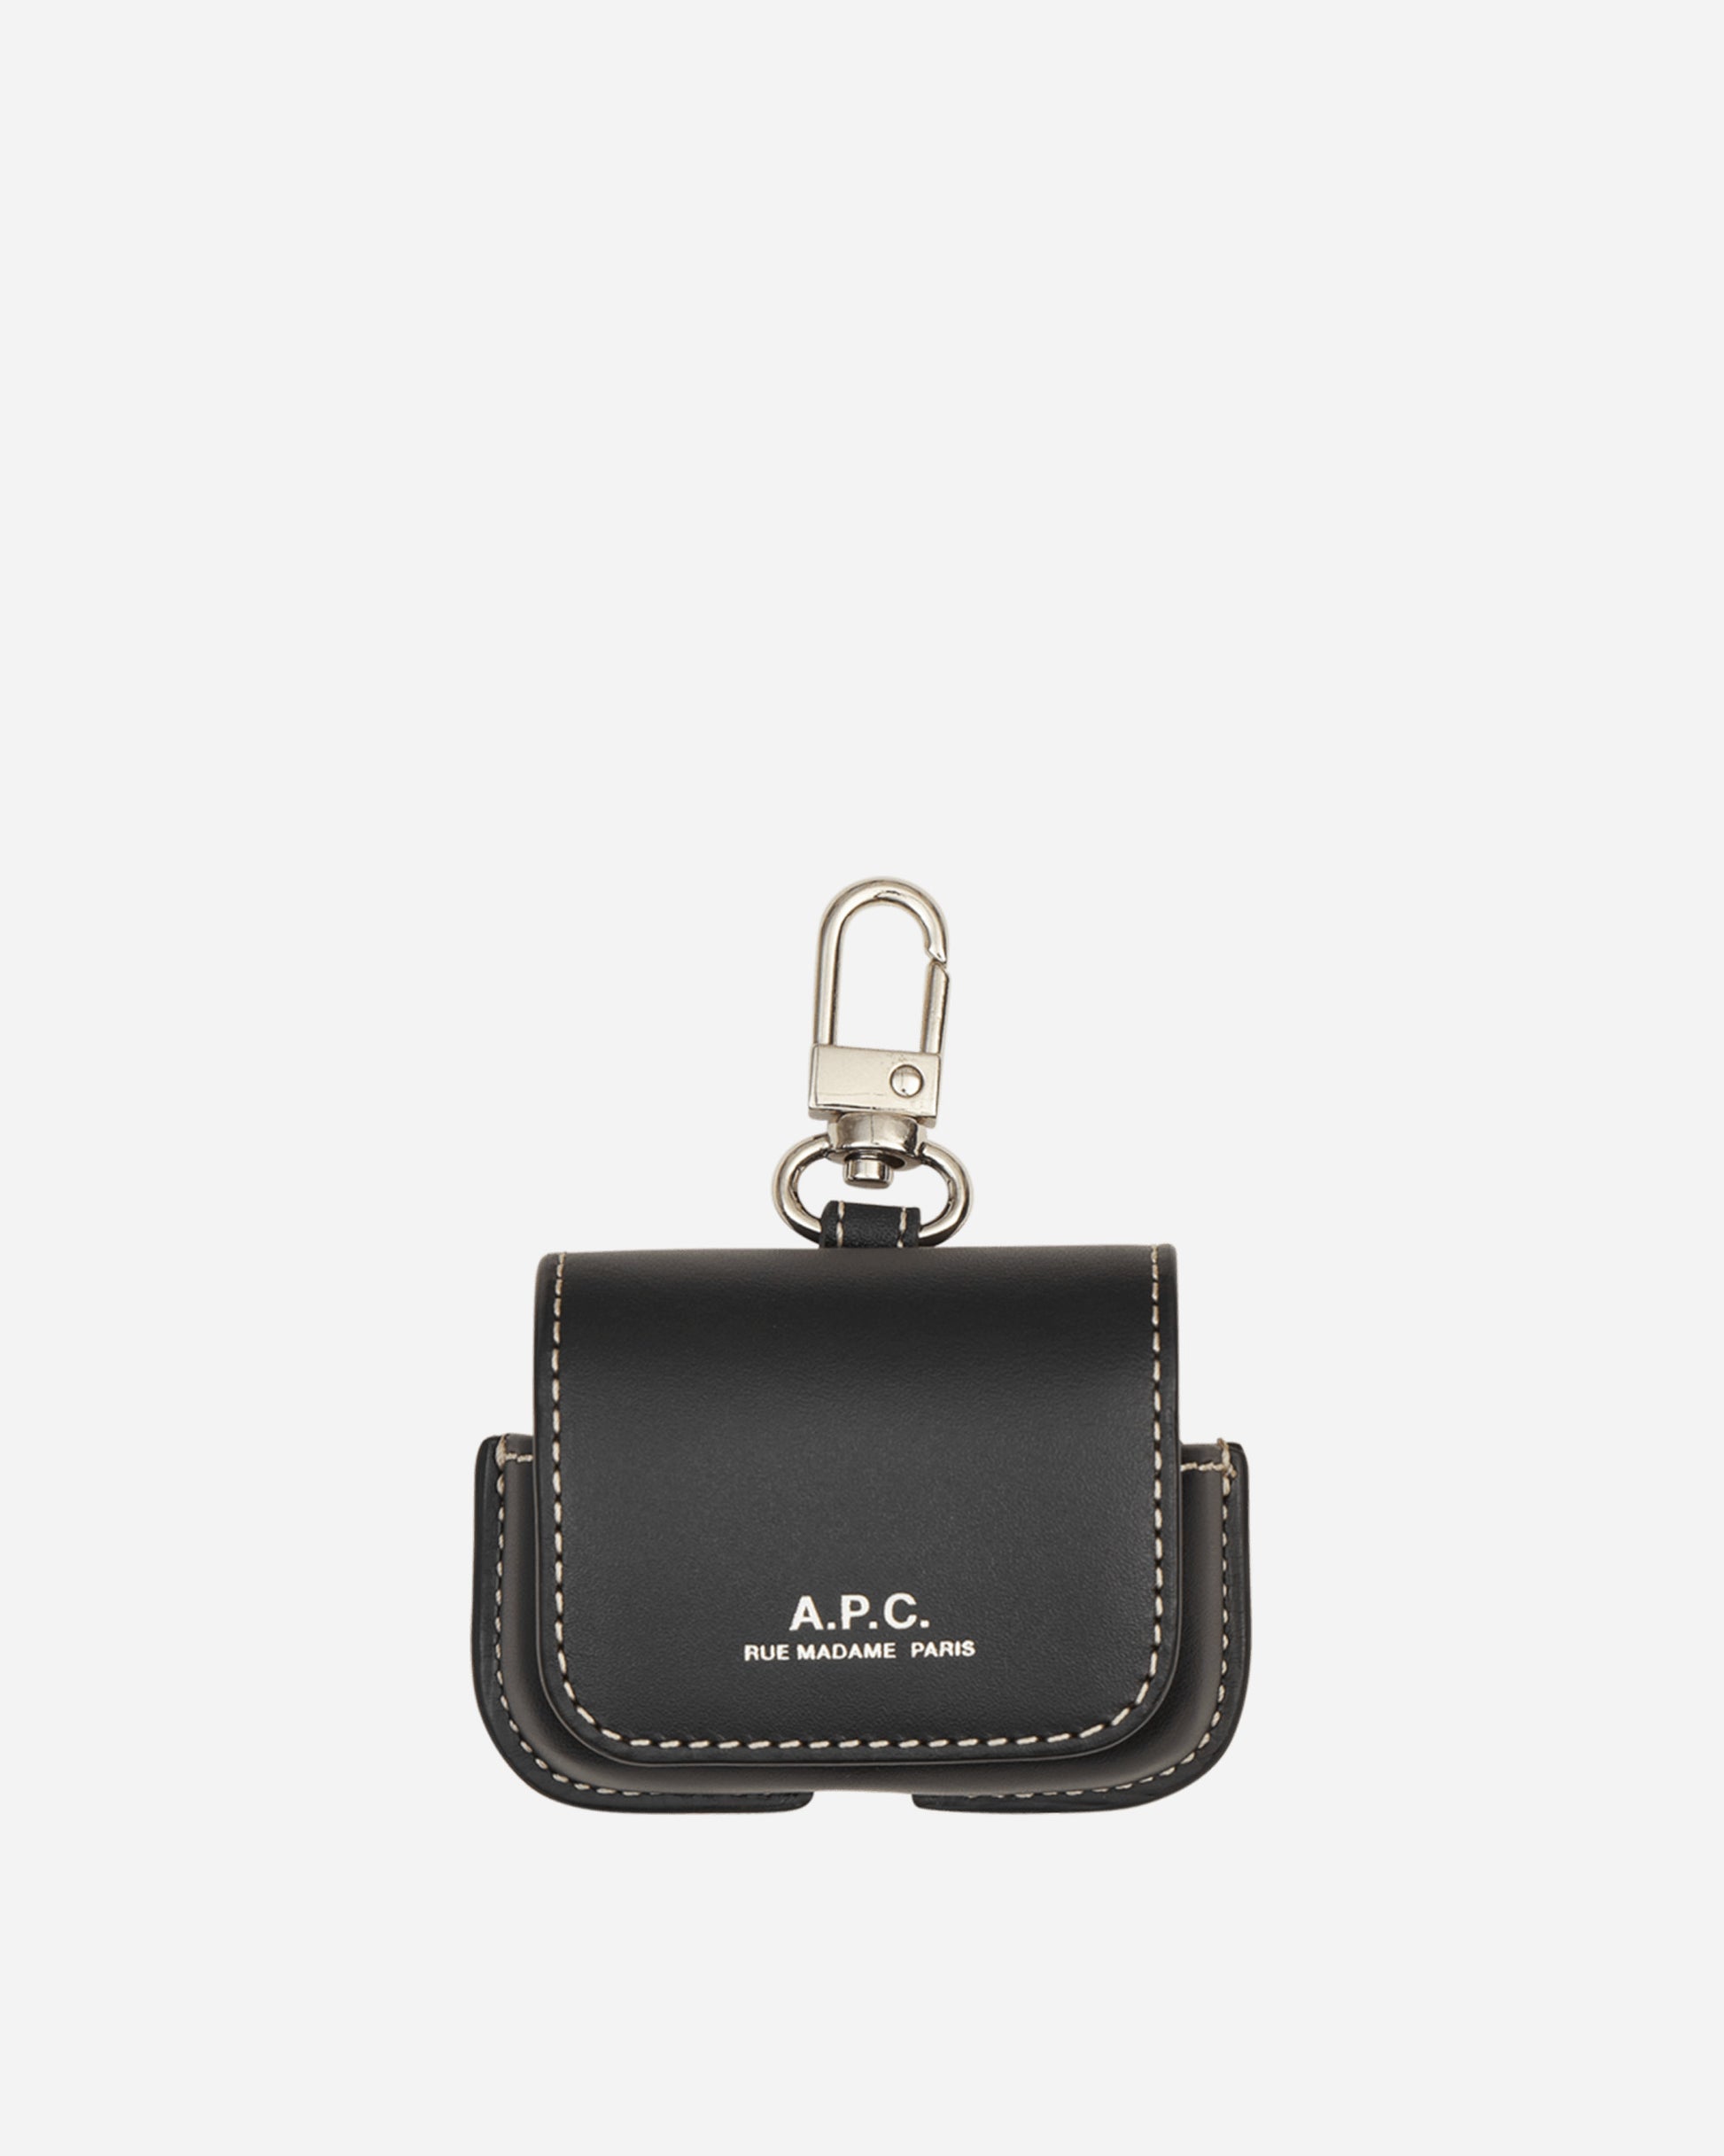 A.P.C. Airpods Case Max Version Pro Black  Equipment Keychains PXAWV-M63476 LZZ